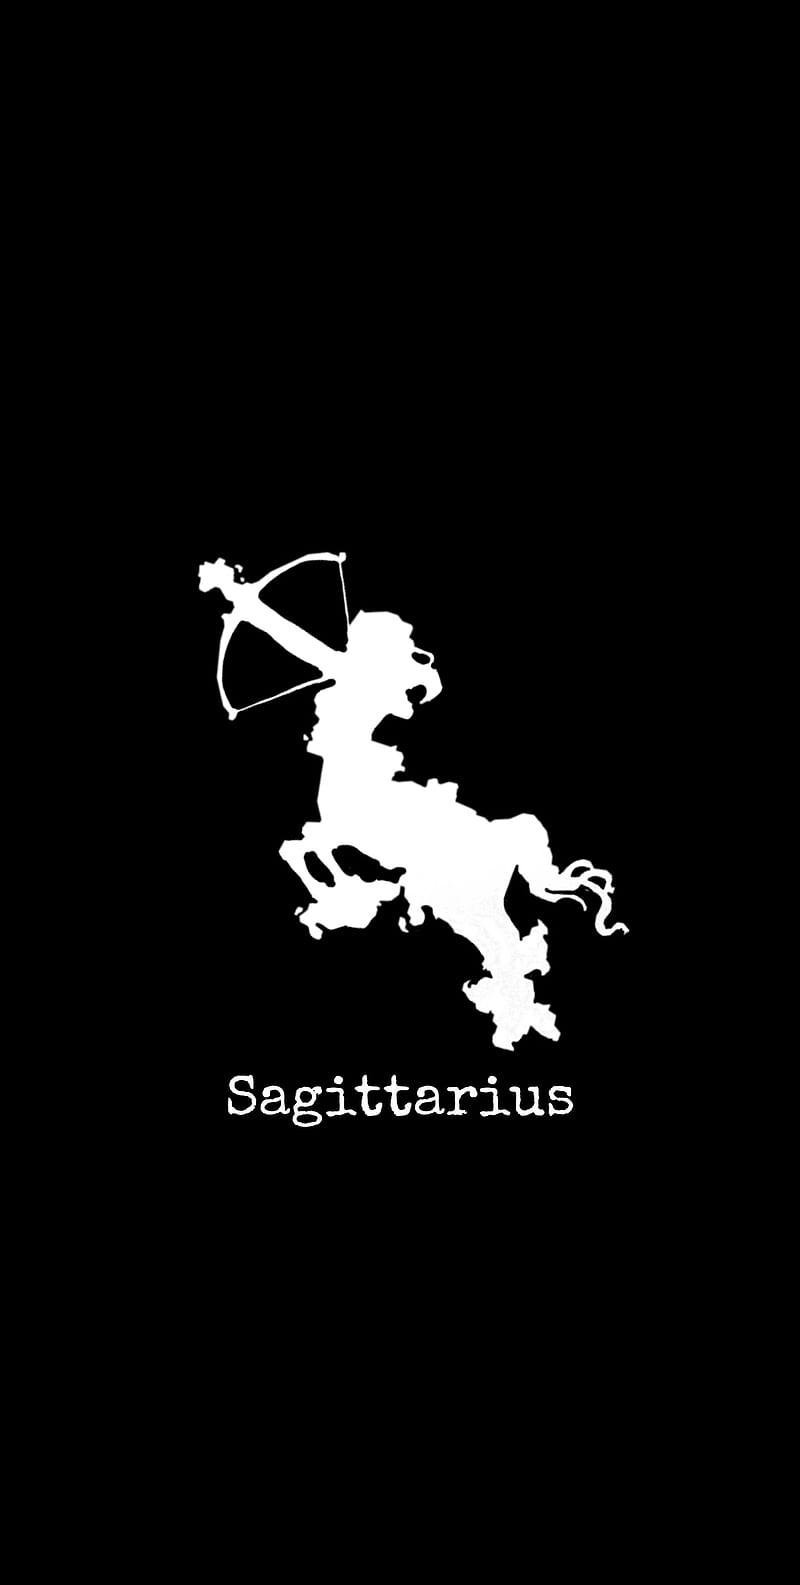 Sagittarius Sign wallpaper by LoveYou812  Download on ZEDGE  eab1